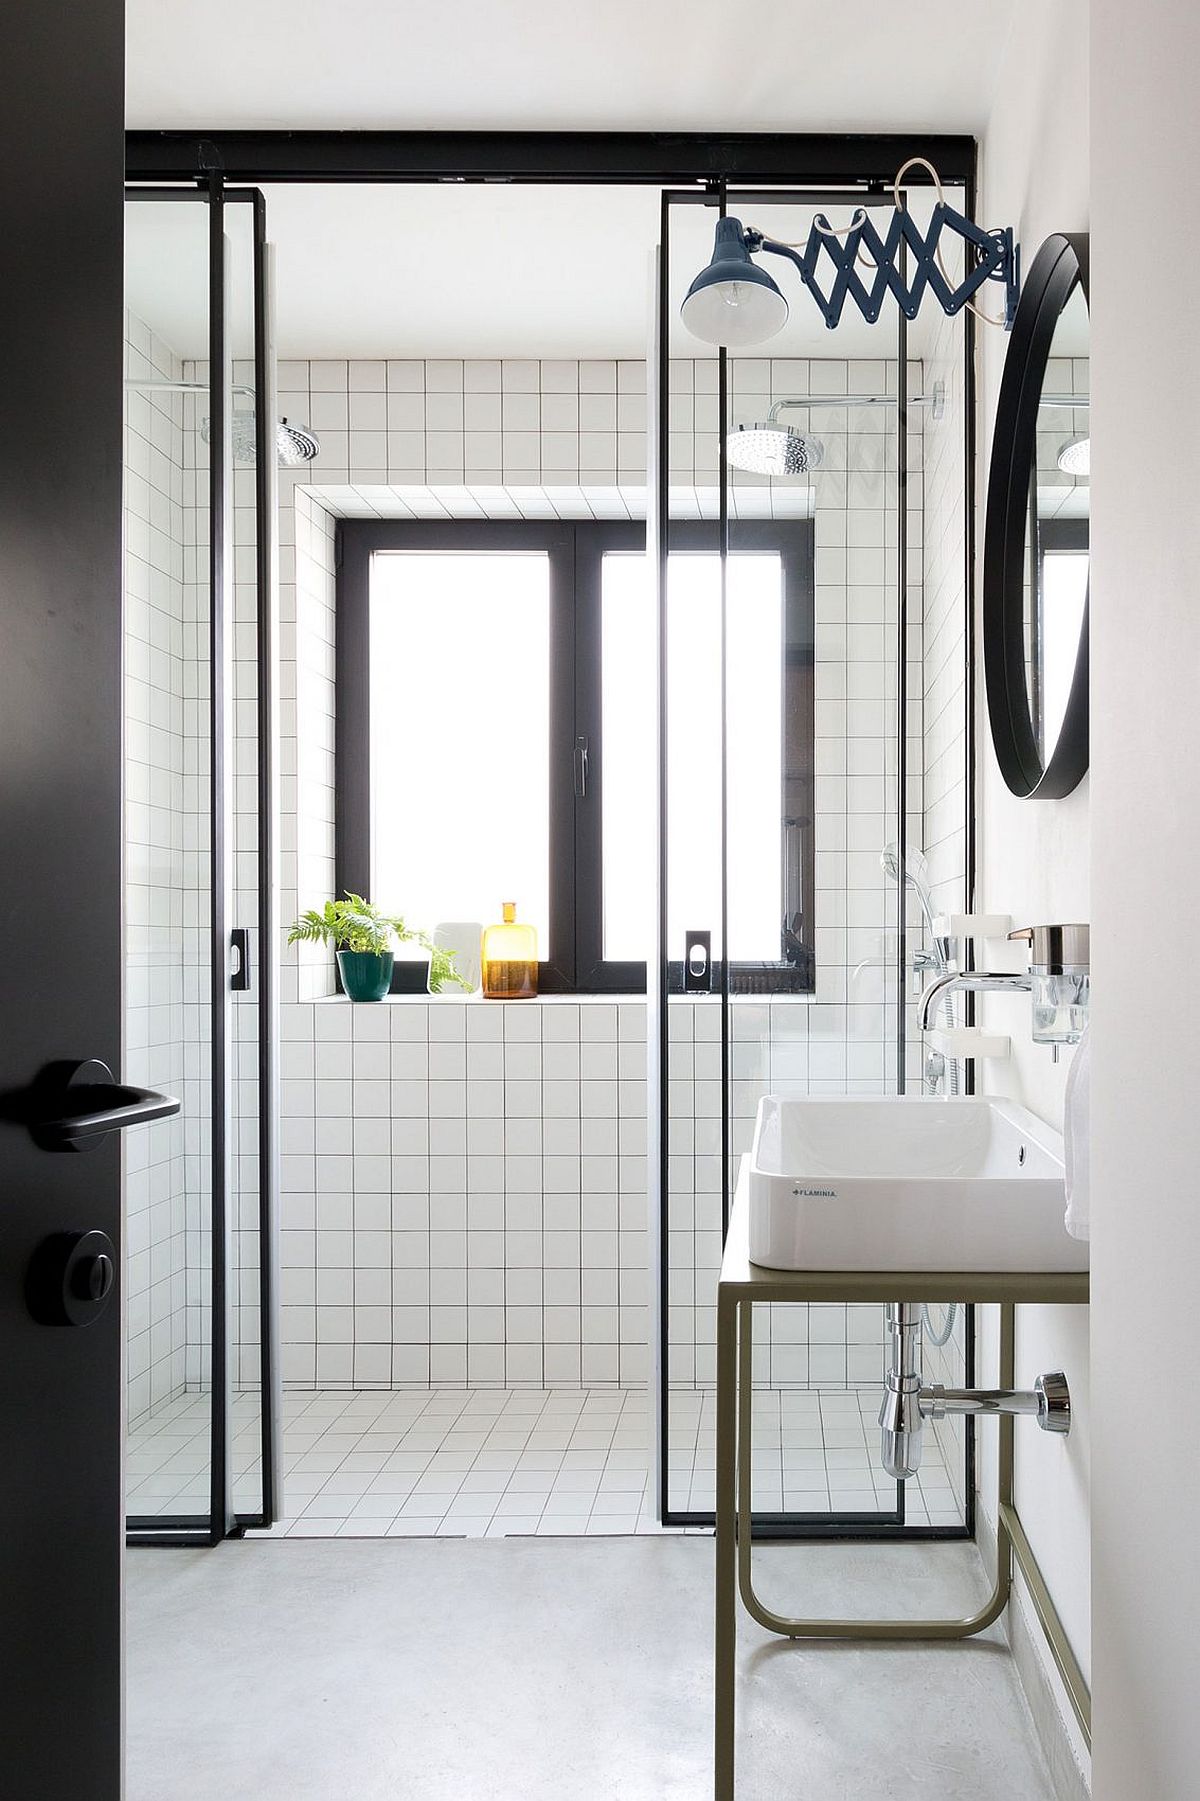 Exquisite bathroom in black and white with geometric charm